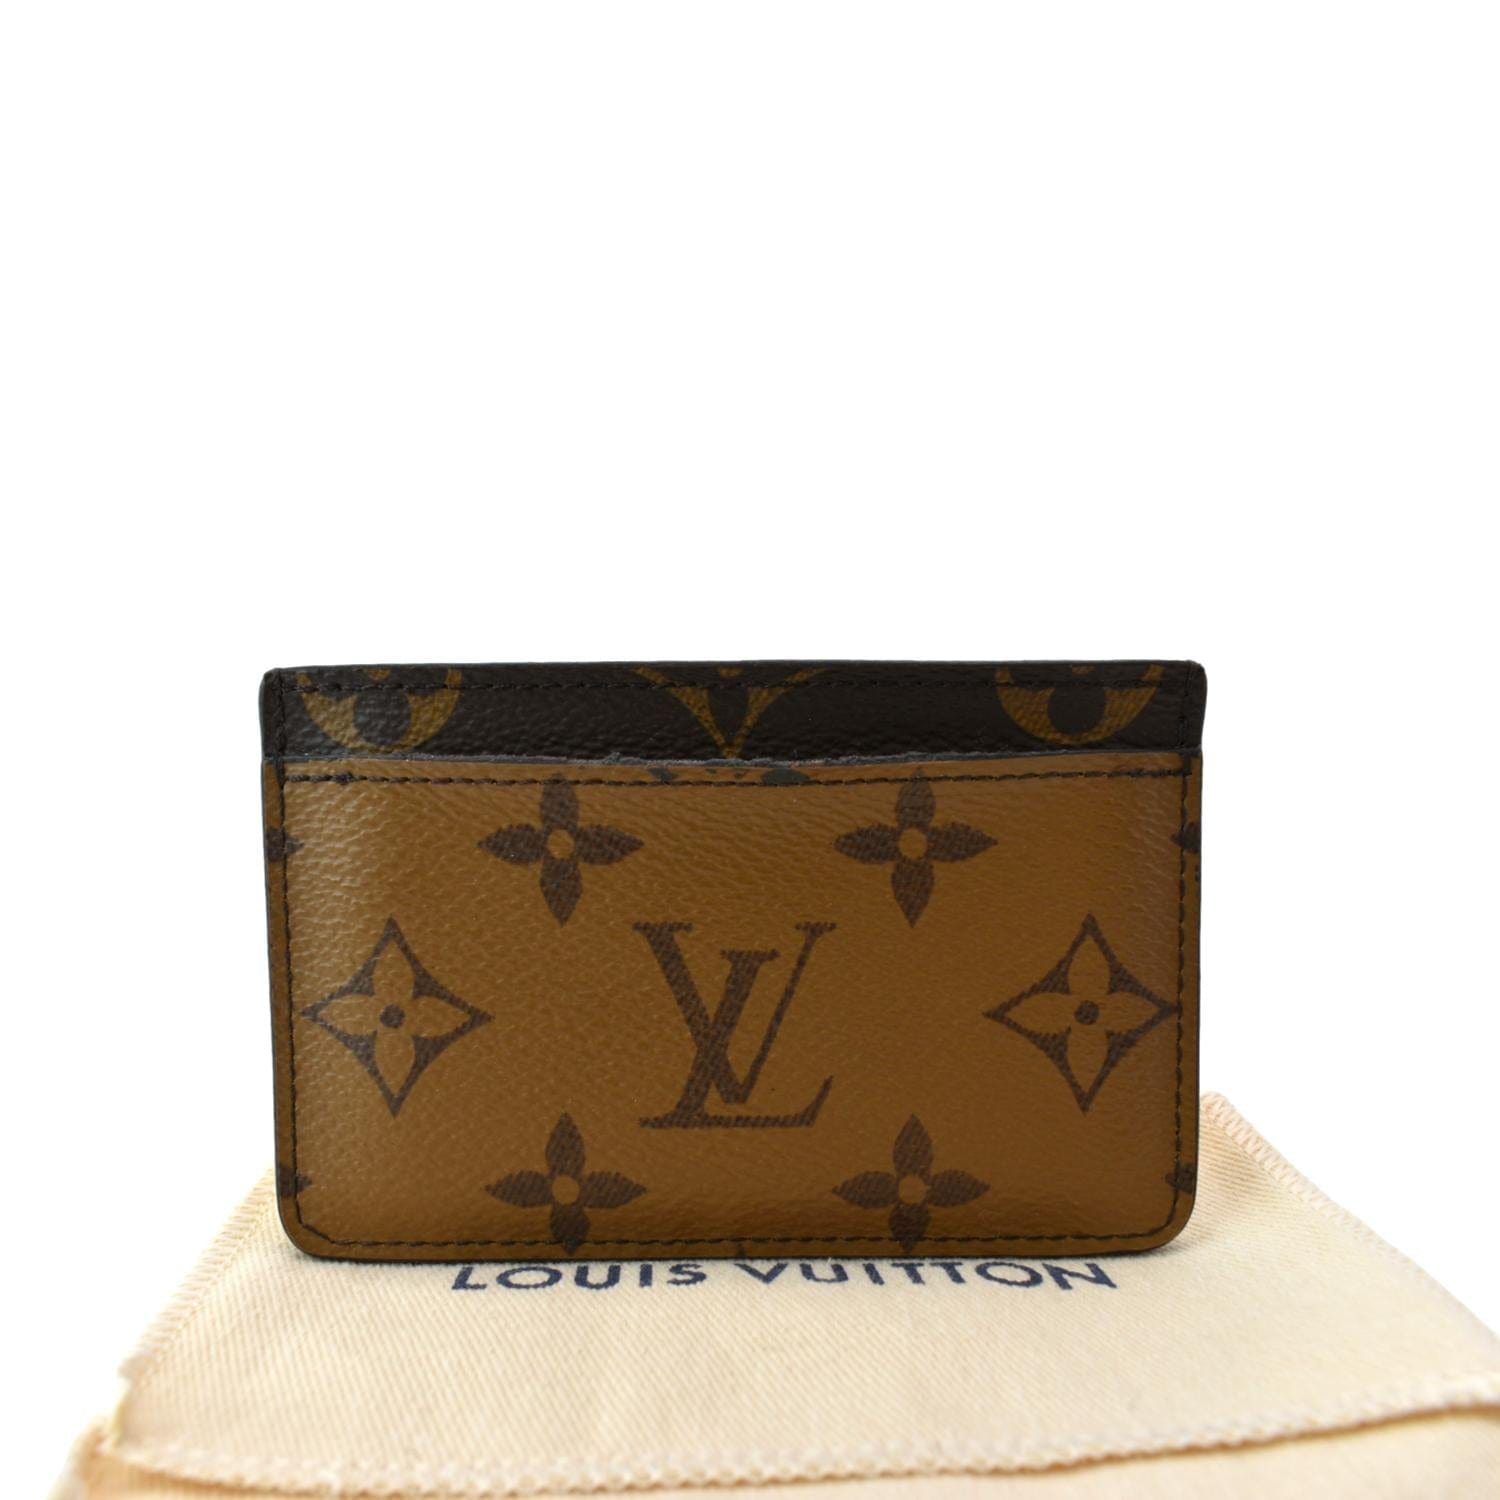 Unboxing Louis vuitton card holder รุ่น Romy, Gallery posted by Palmmm ❋